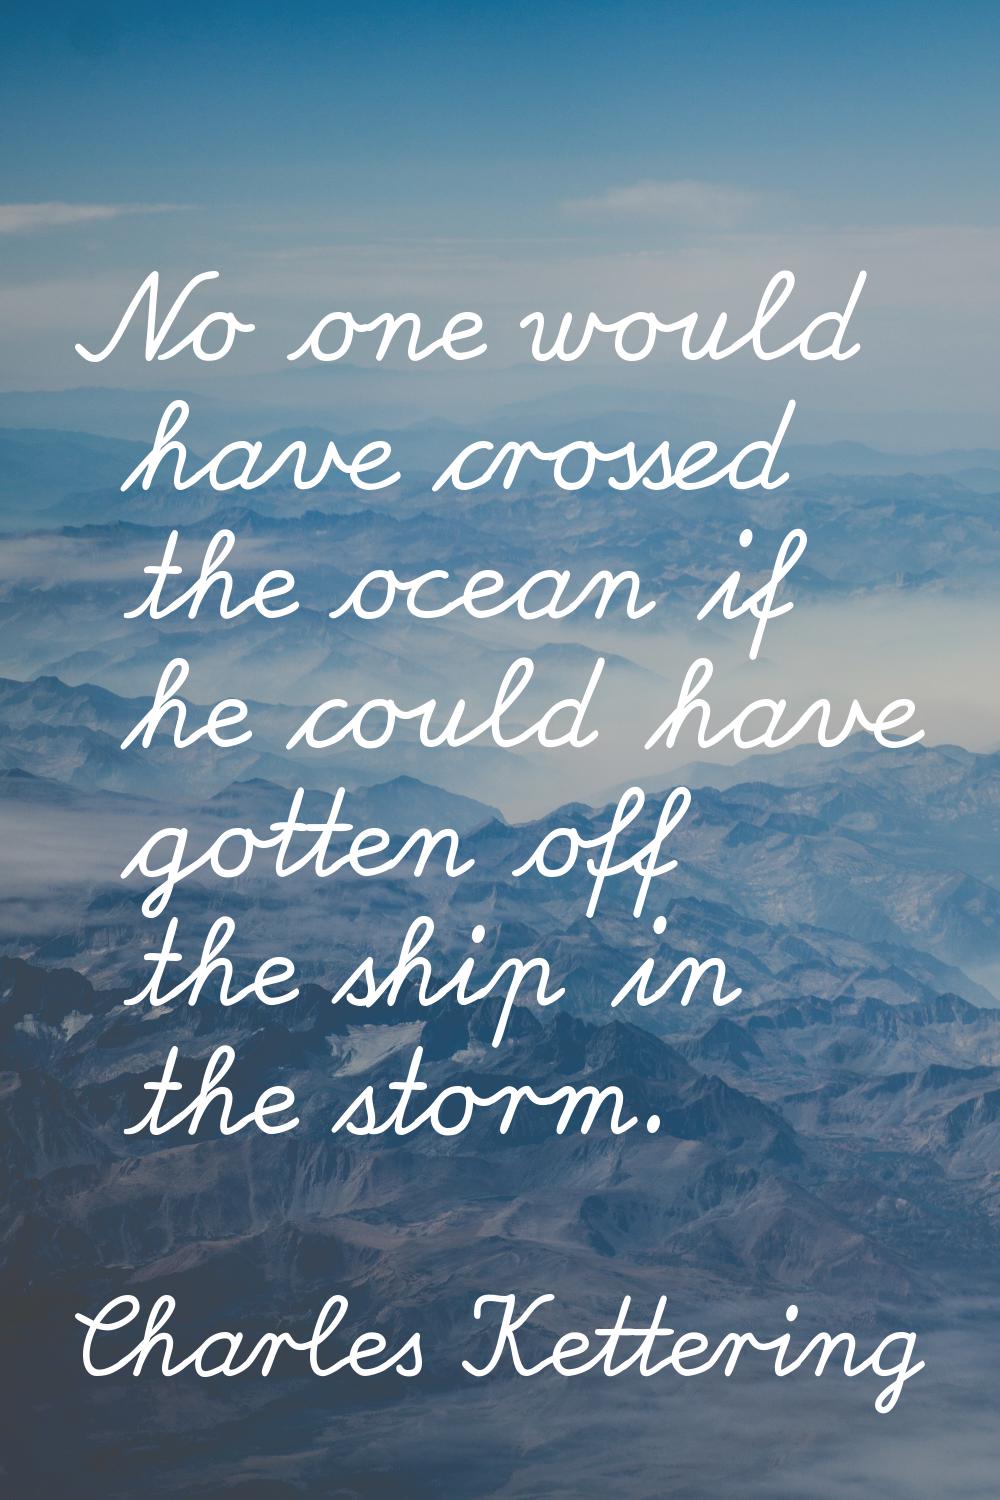 No one would have crossed the ocean if he could have gotten off the ship in the storm.